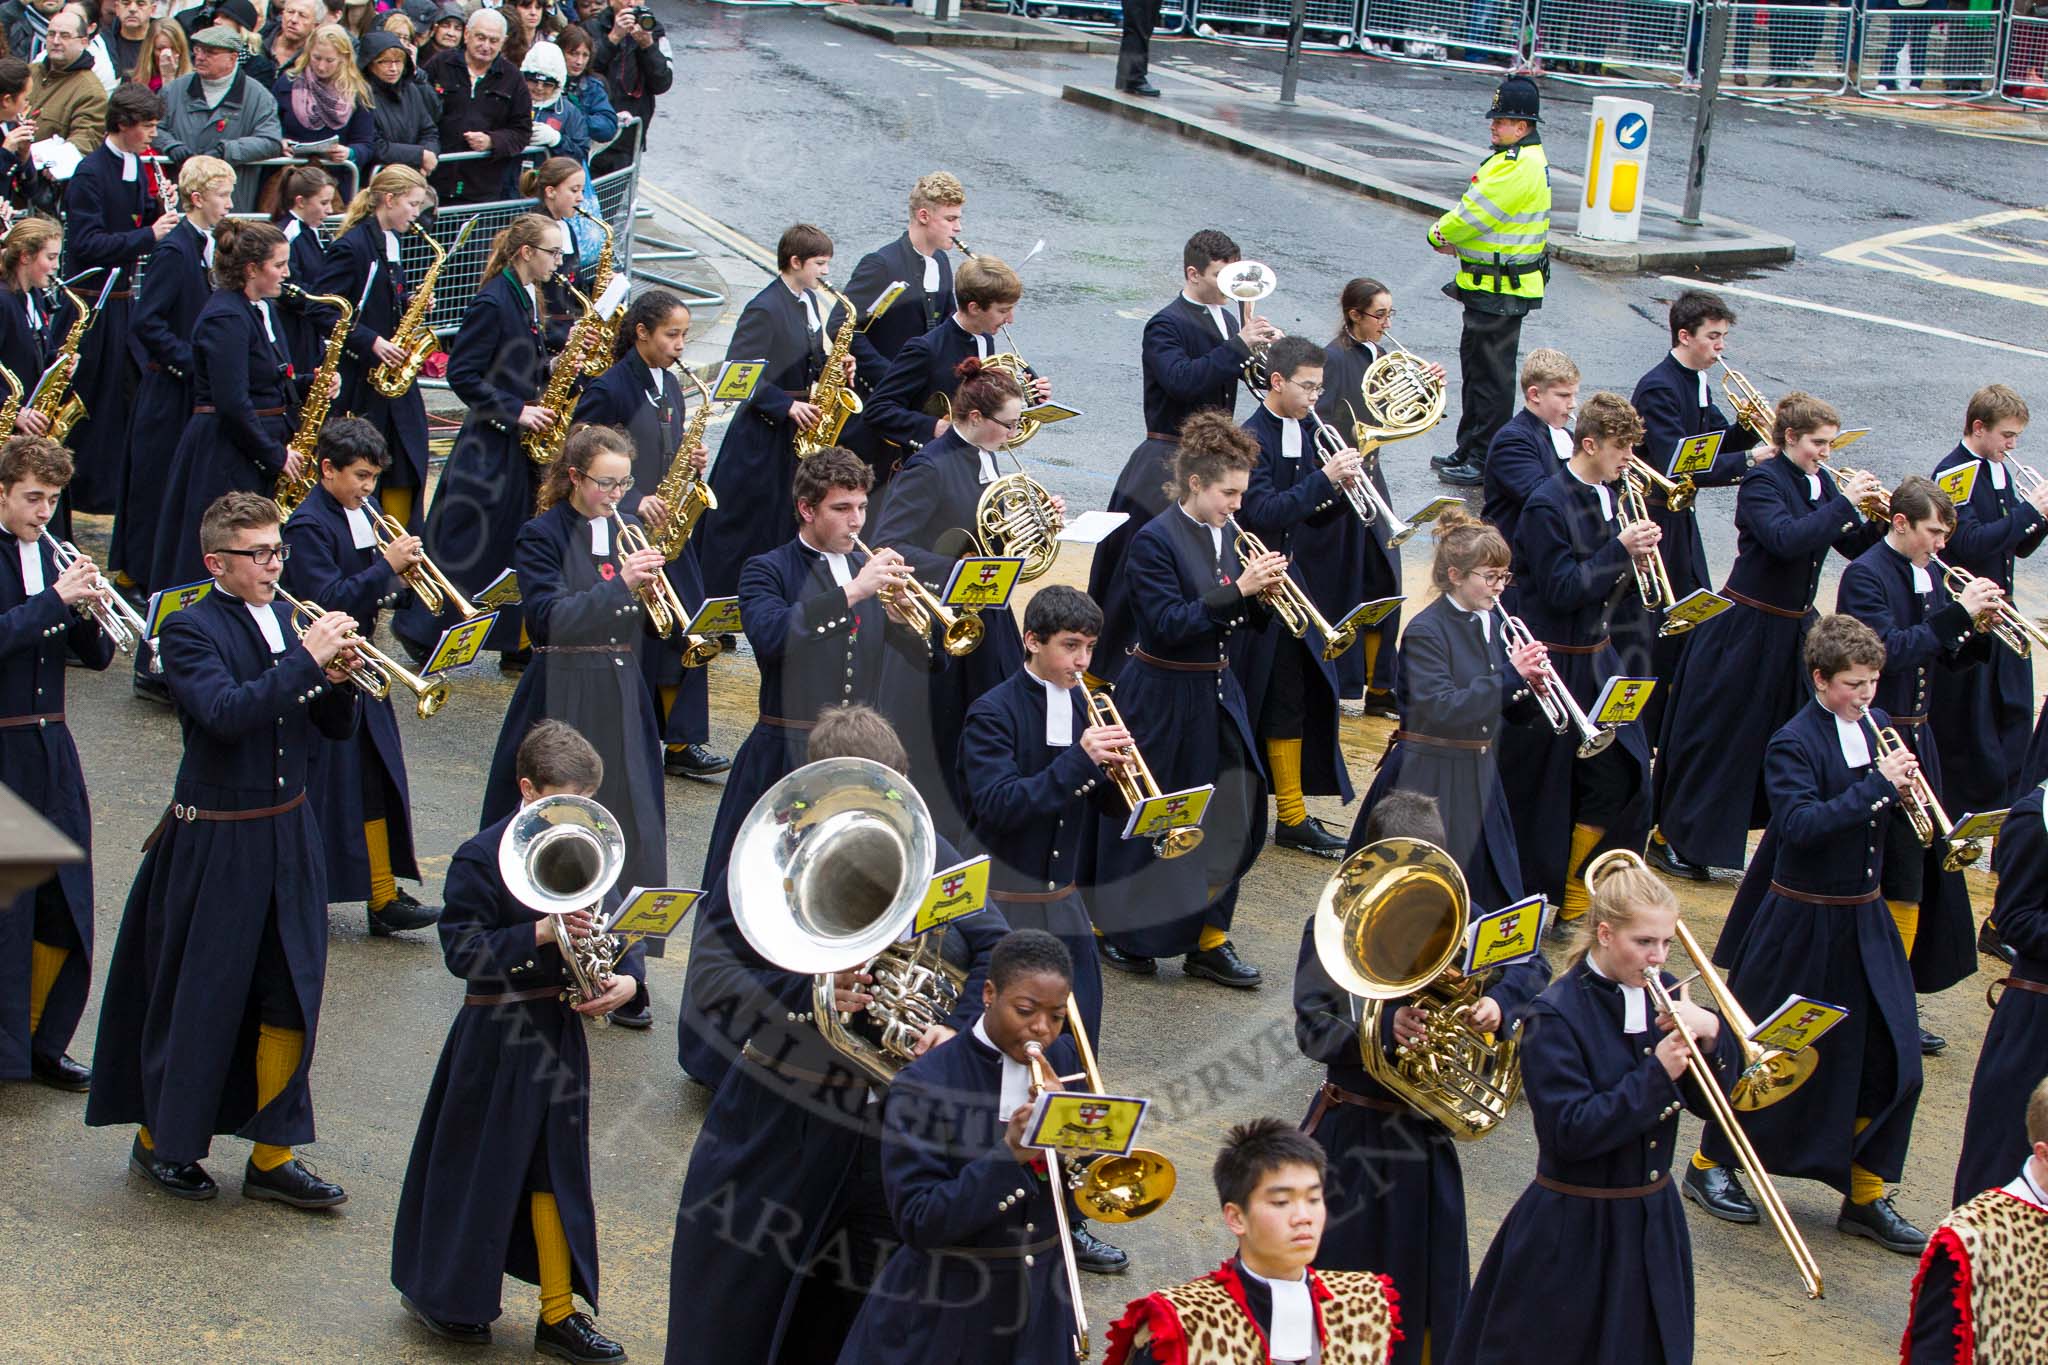 Lord Mayor's Show 2012: Entry 123 - Christ's Hospital School Band..
Press stand opposite Mansion House, City of London,
London,
Greater London,
United Kingdom,
on 10 November 2012 at 12:02, image #1770